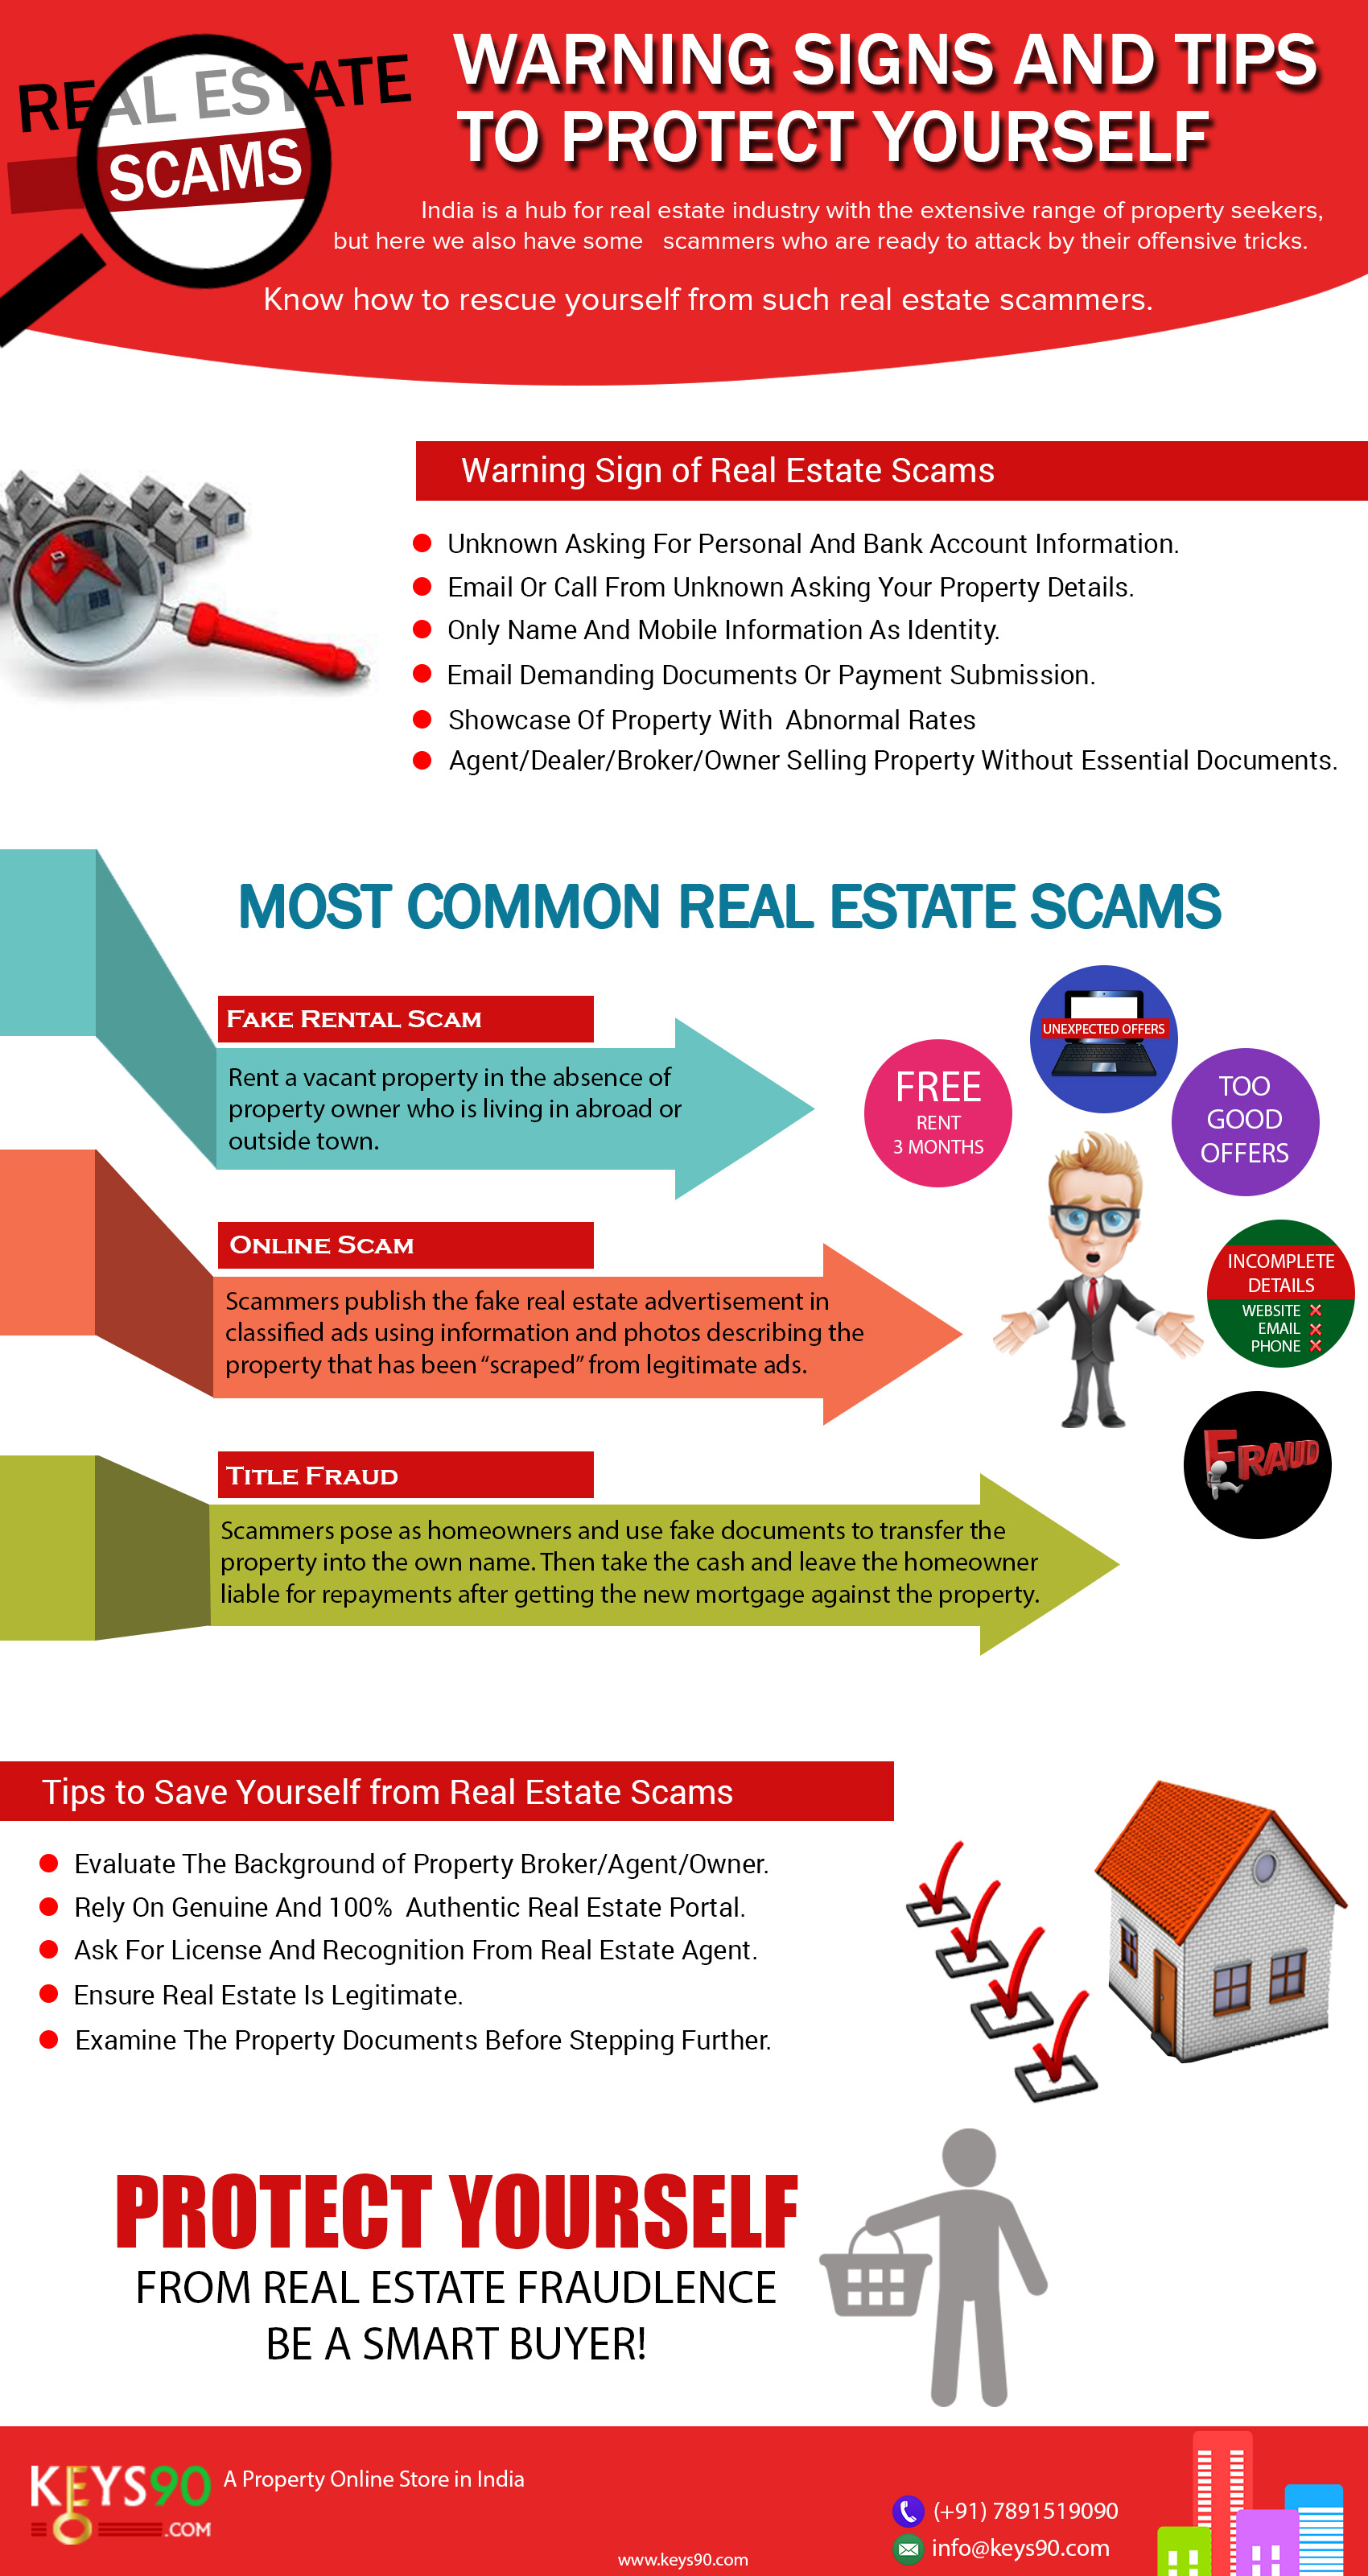 Real Estate Scams Warning Signs And Tips An Infographic Visually